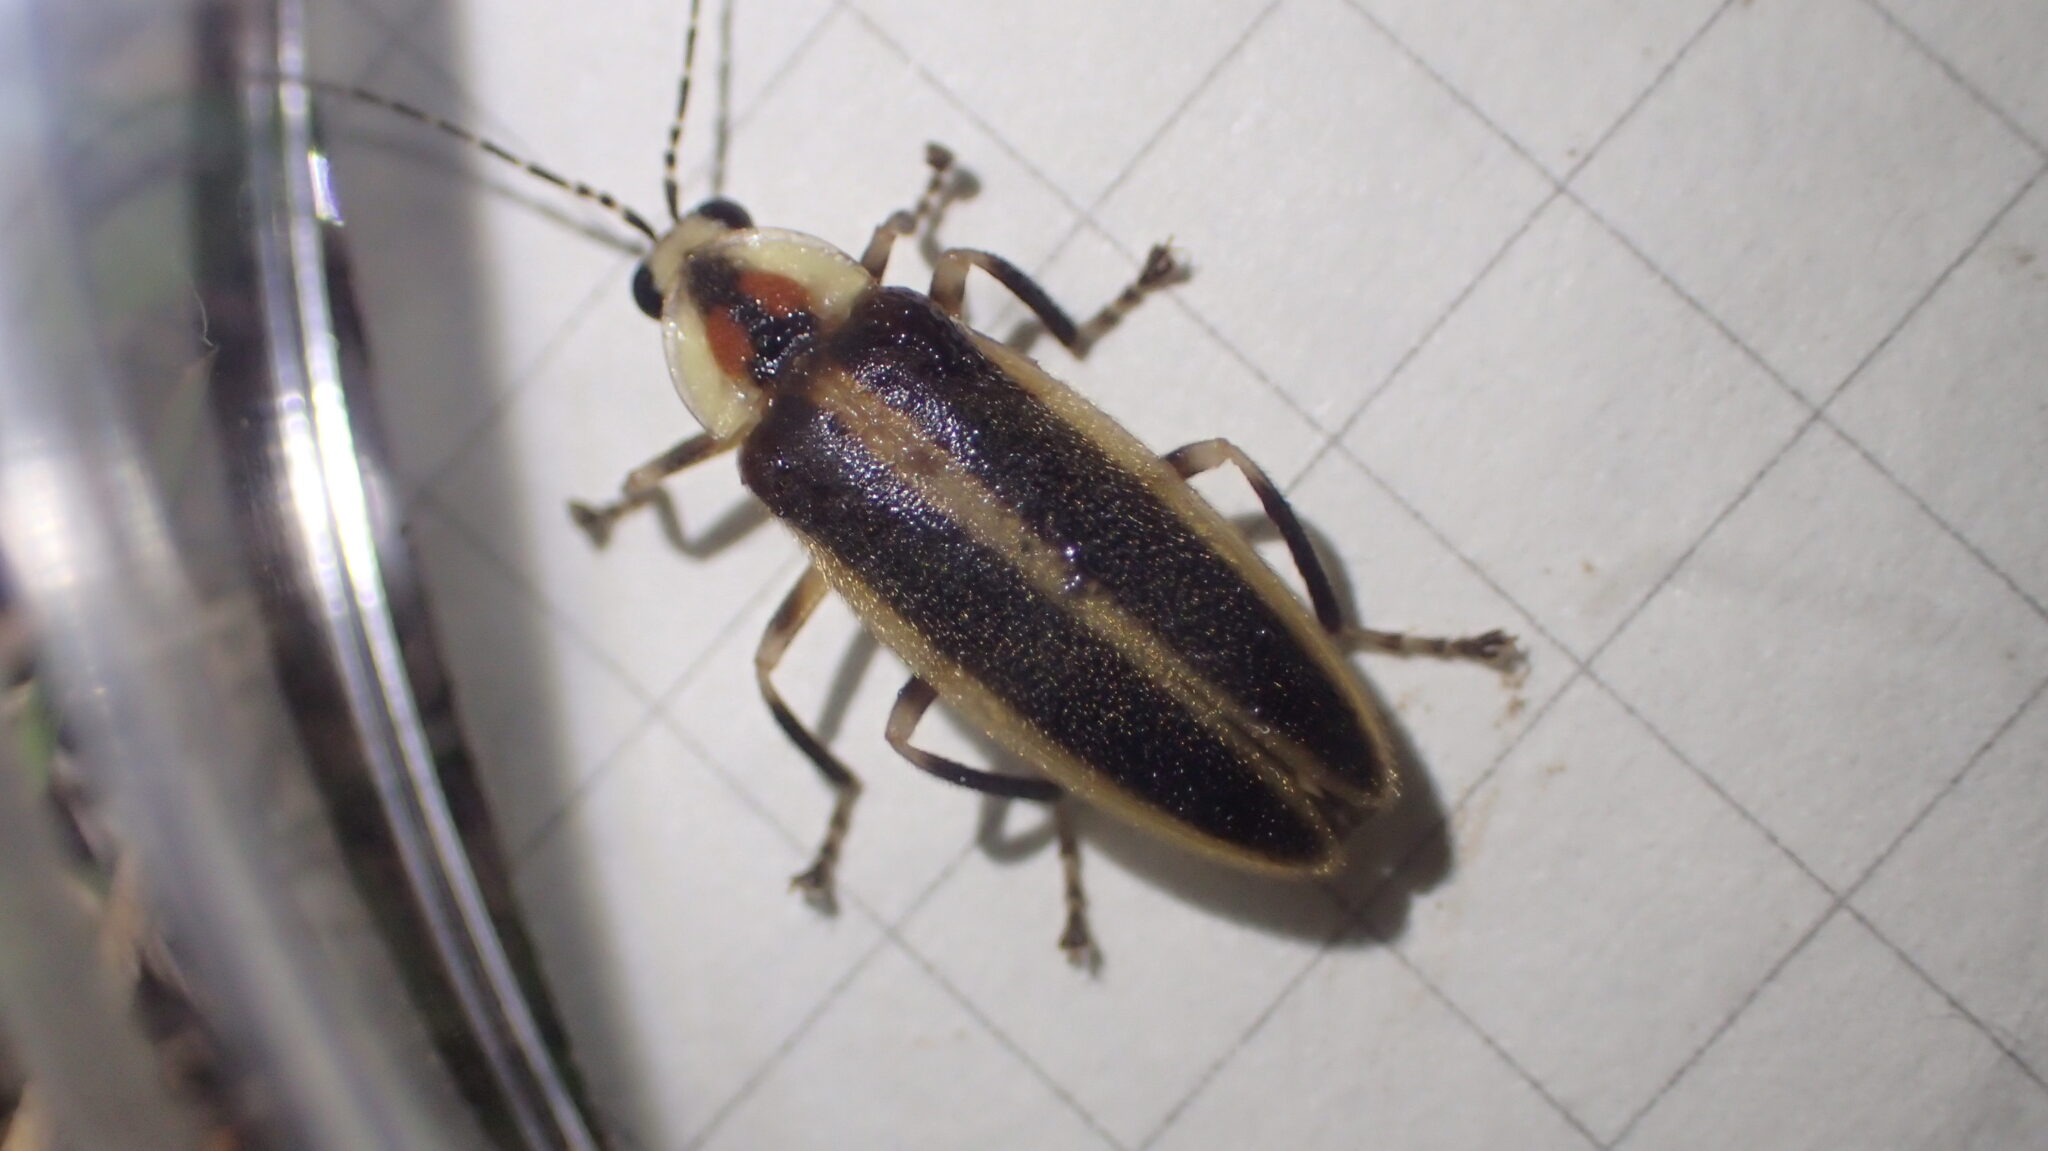 A Photuris firefly against graph paper in a petri dish.